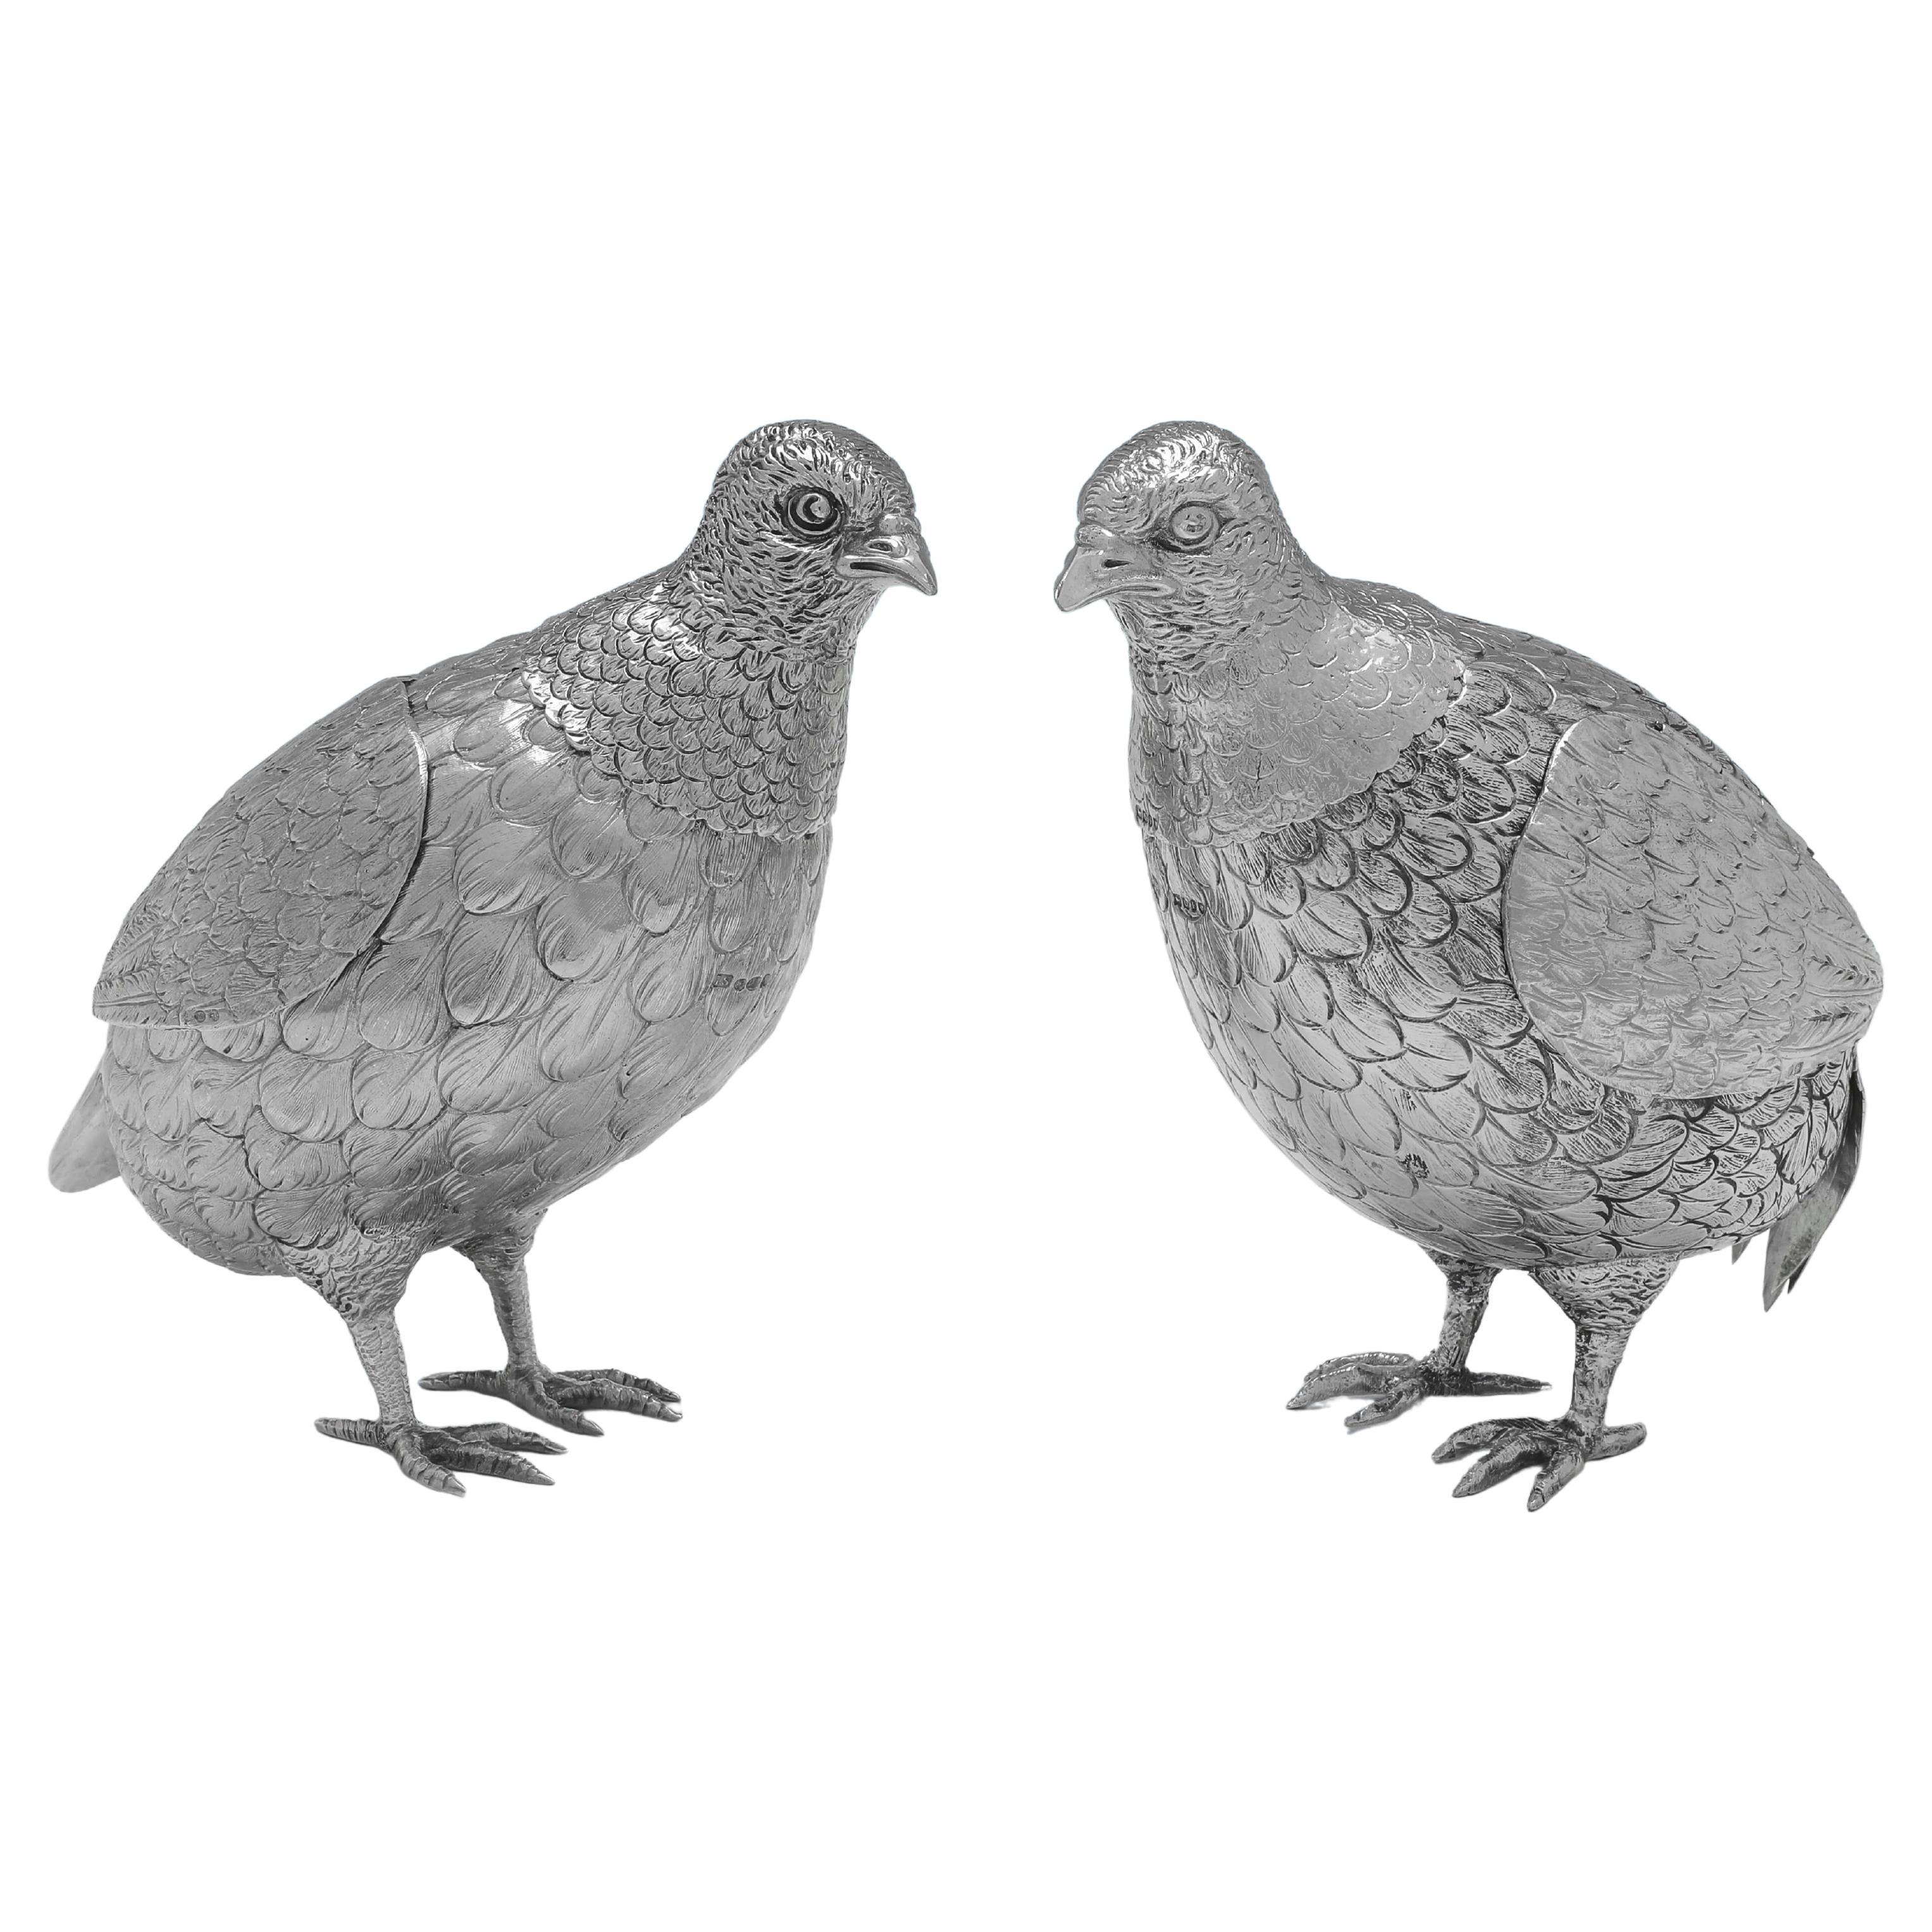 Matched Pair of Antique Sterling Silver Models of Partridges, 1897 & 1925